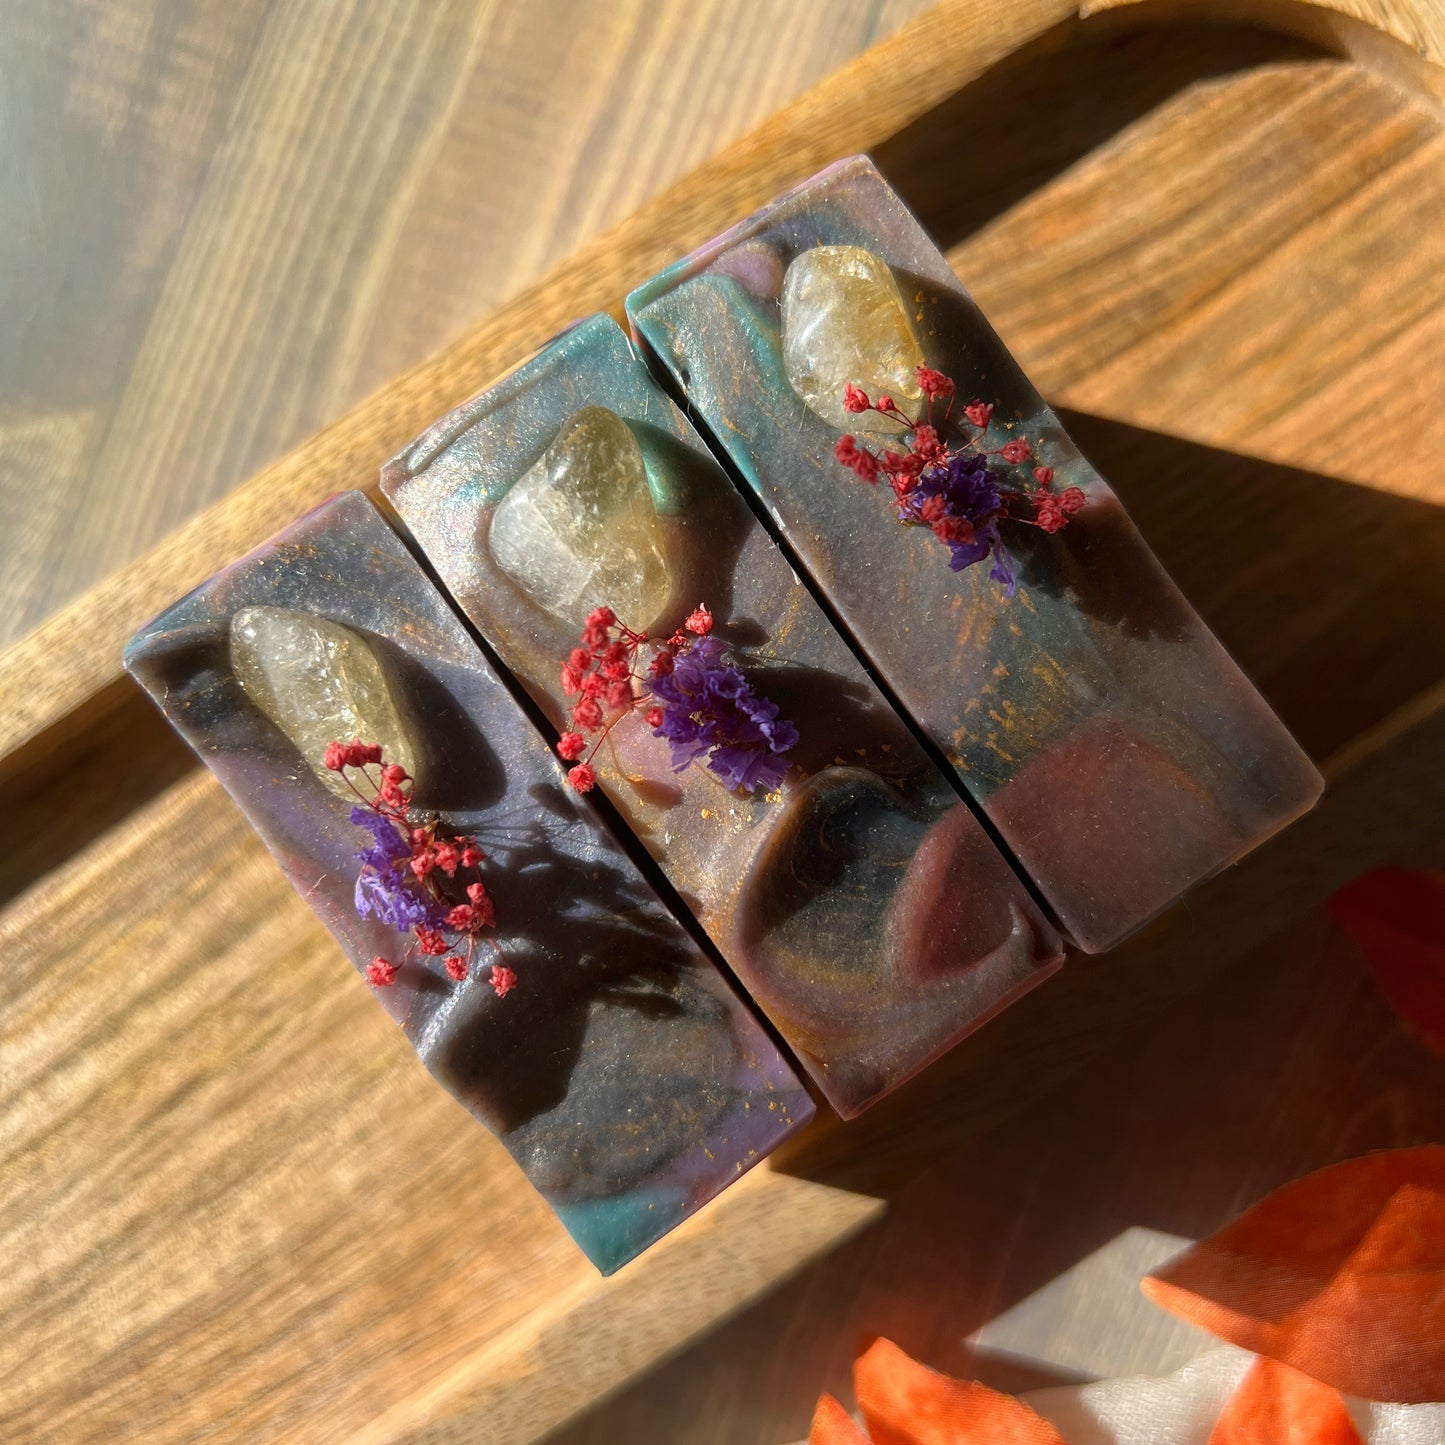 Handmade soaps from Lather and Soul, infused with real crystals